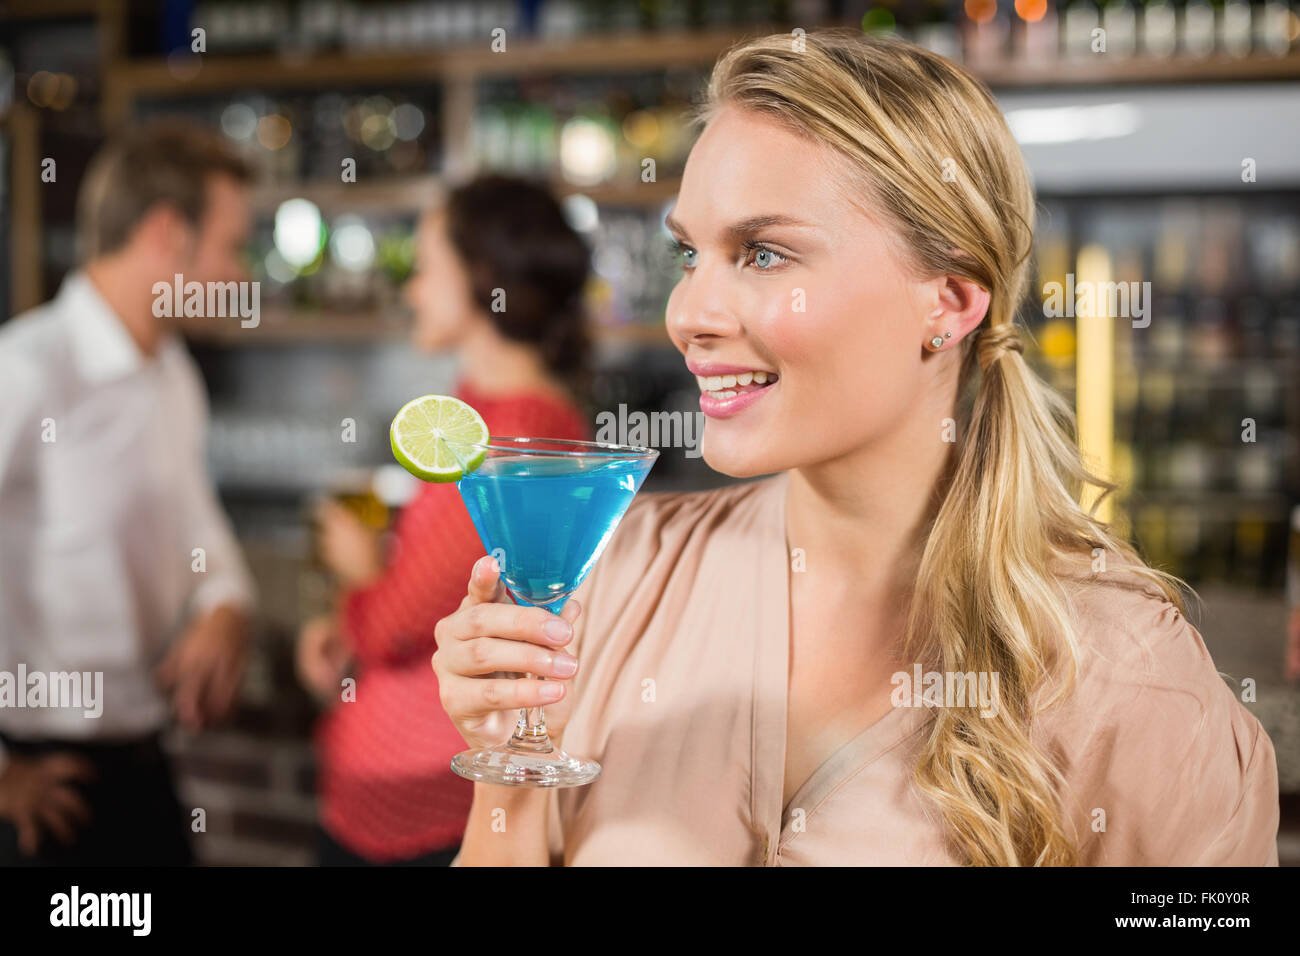 Attractive woman holding cocktail glass Stock Photo